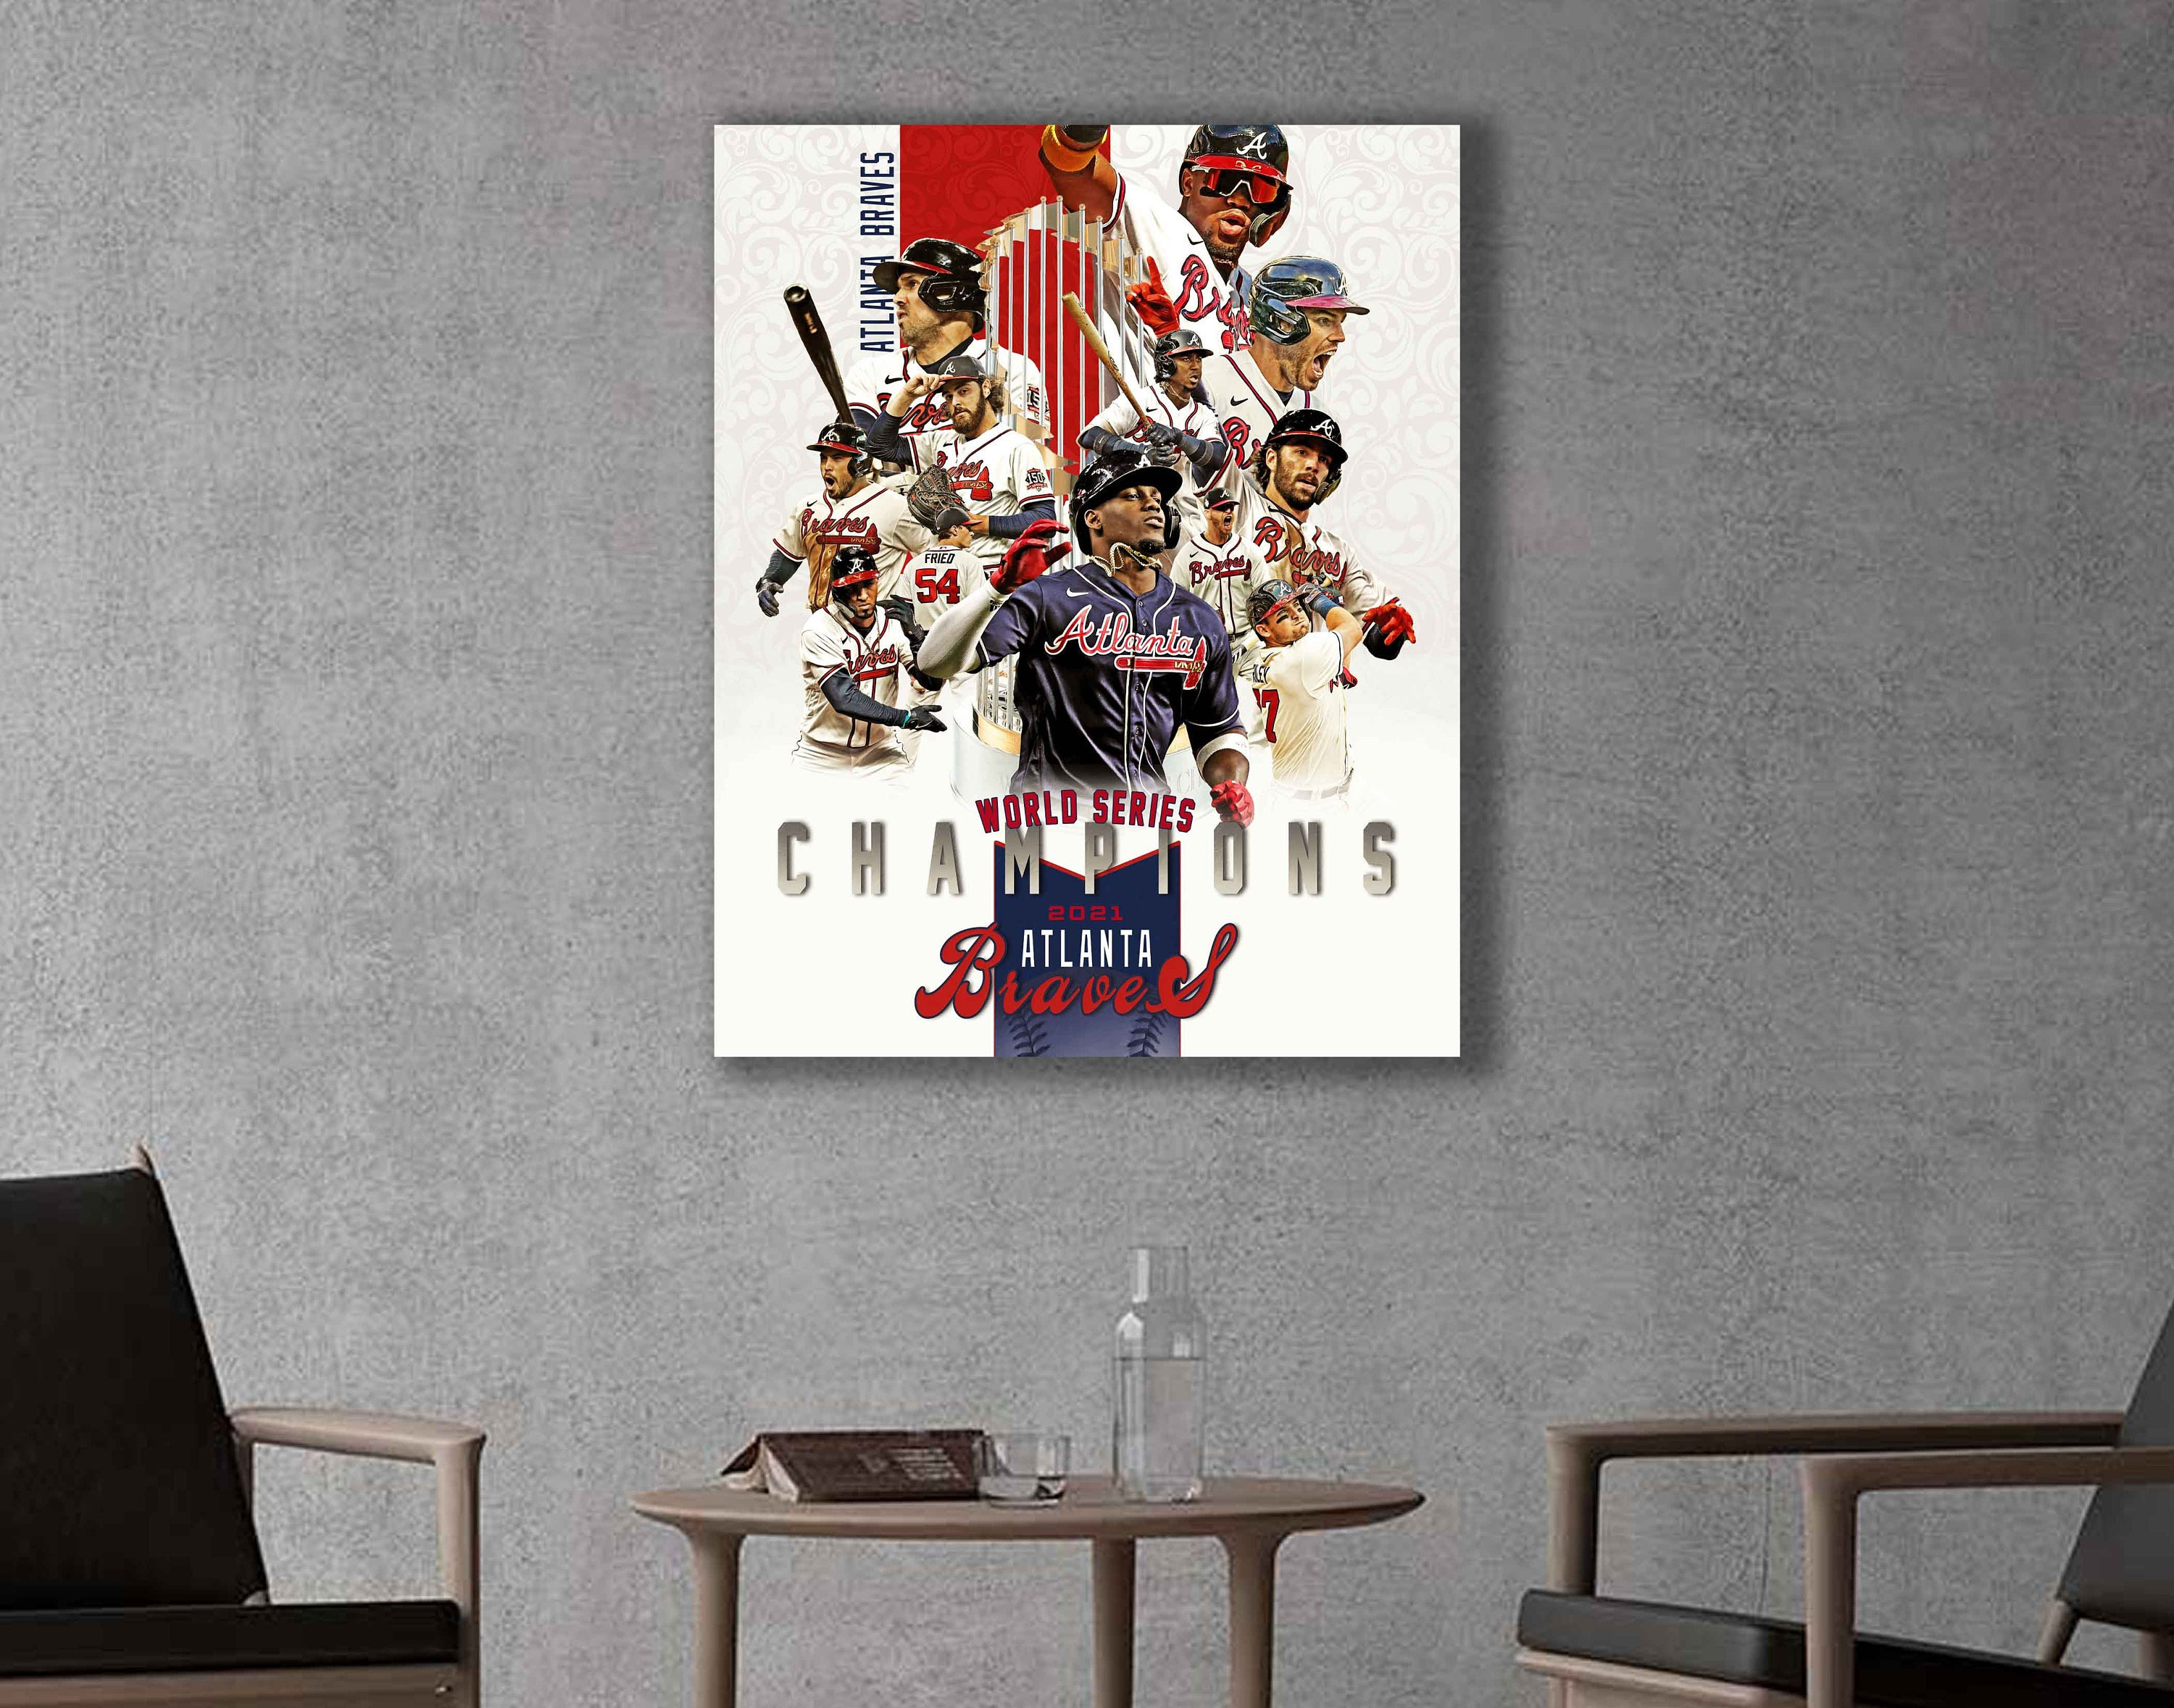  Max Fried Baseball Poster8 Canvas Boutique Poster Wall Art  Decoration Unframe: 20x30inch(50x75cm): Posters & Prints